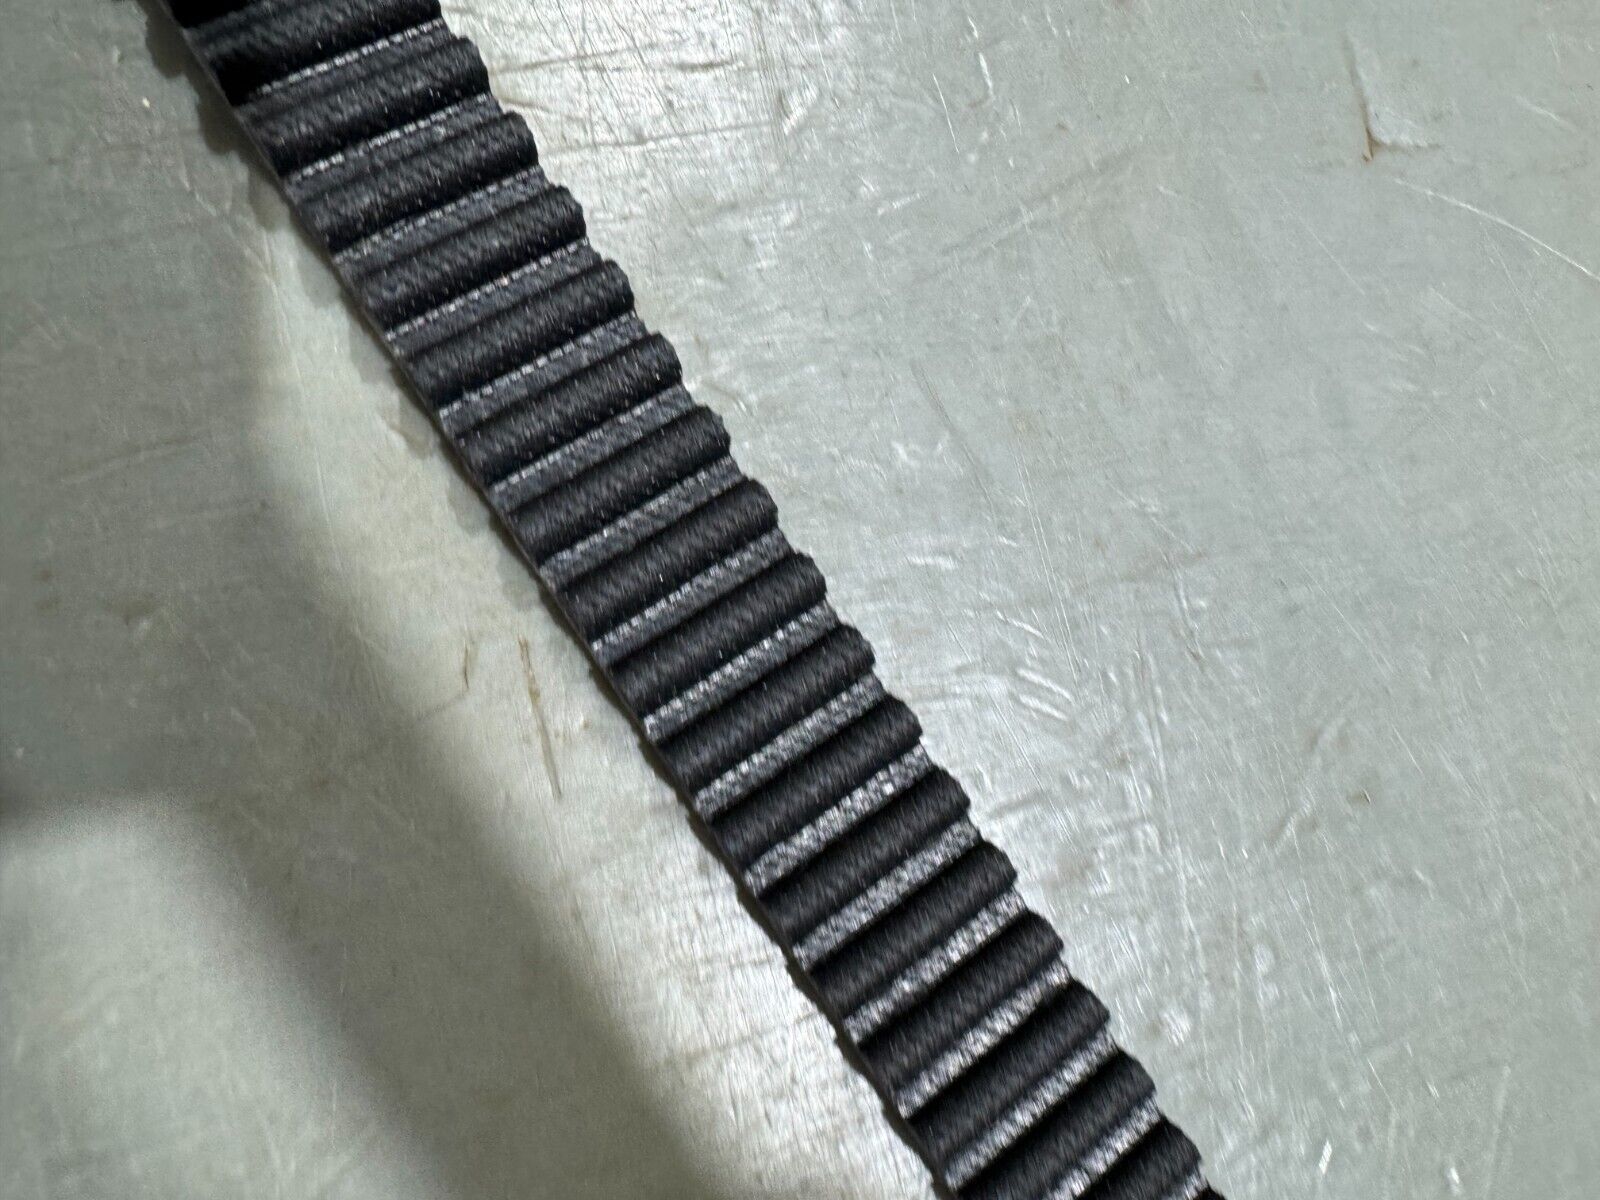 FACTORY NEW GOODYEAR SYNCHRONOUS Sync HTD TIMING BELT 1160-8M-20